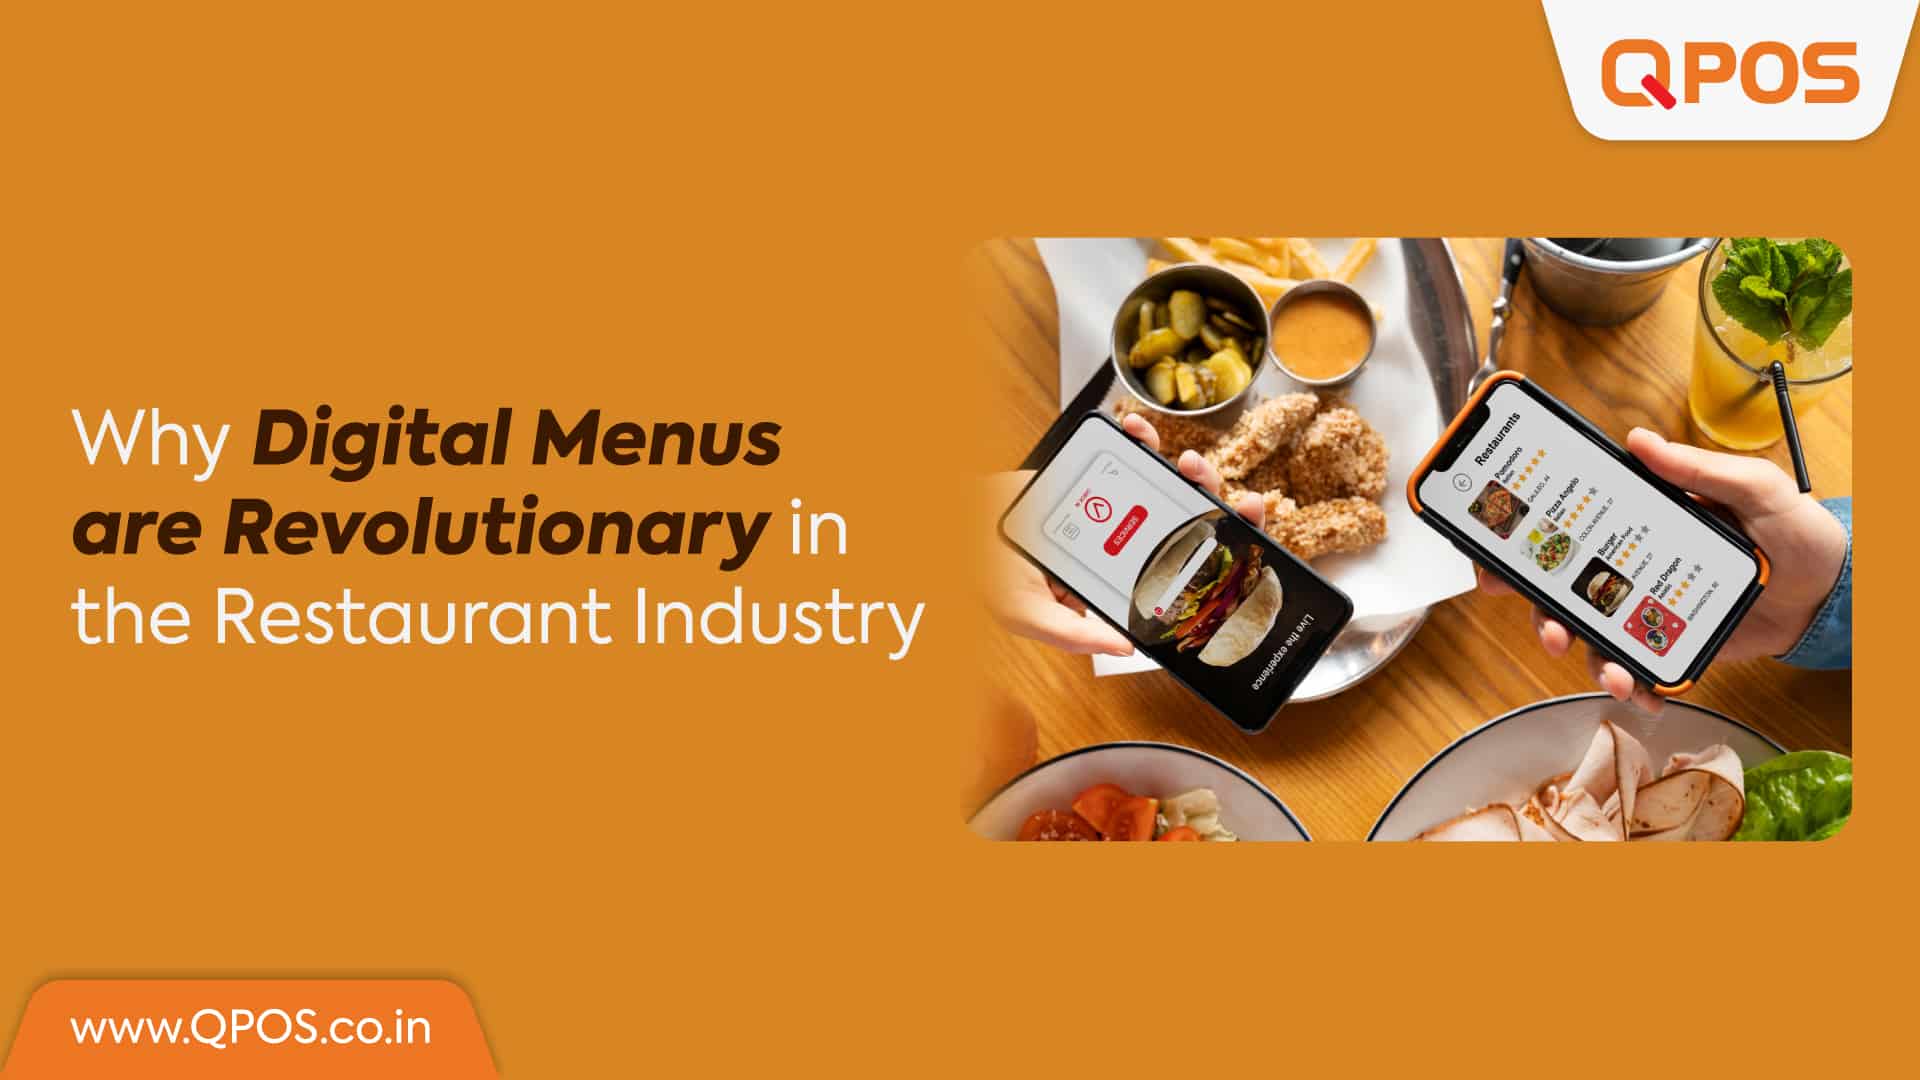 Why Digital Menus Are Revolutionary in the Restaurant Industry